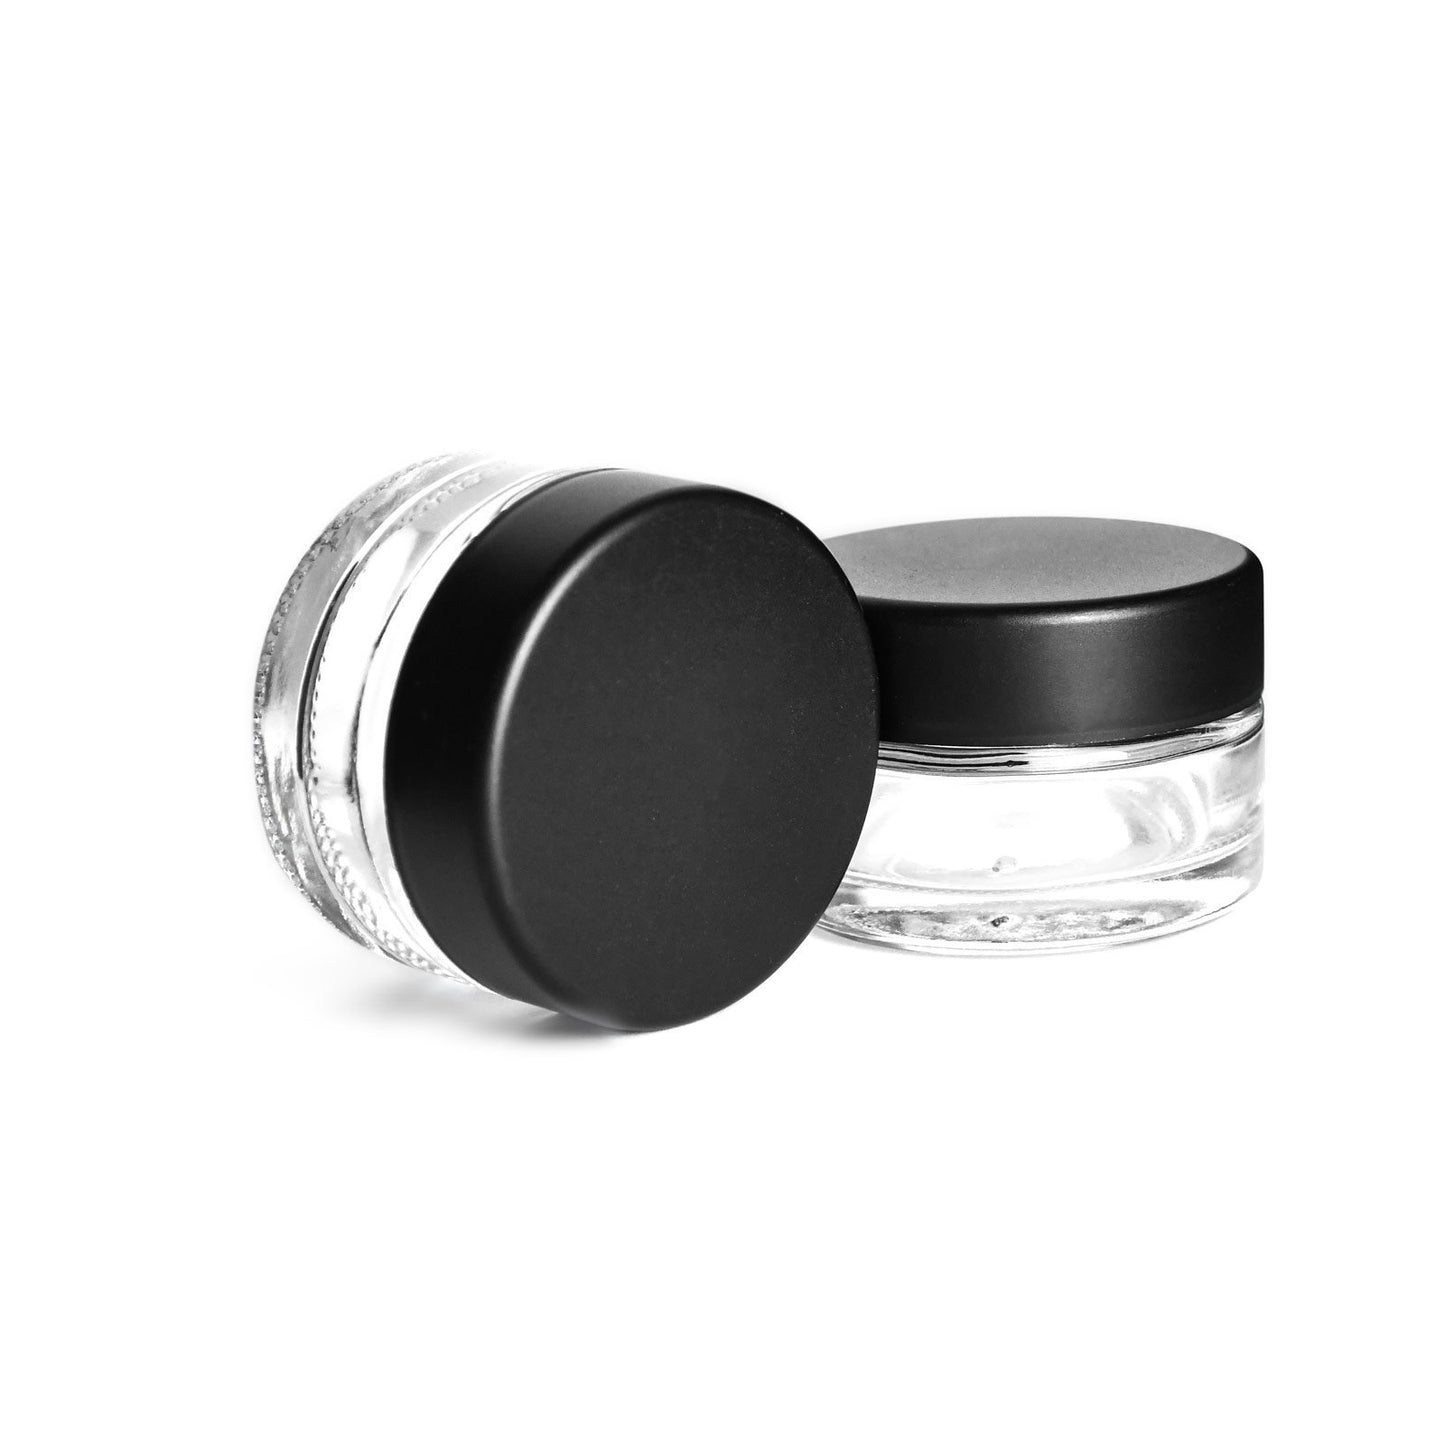 1oz Child Resistant Glass Jars with Black Caps 1-2 Grams 200 Count at Flower Power Packages